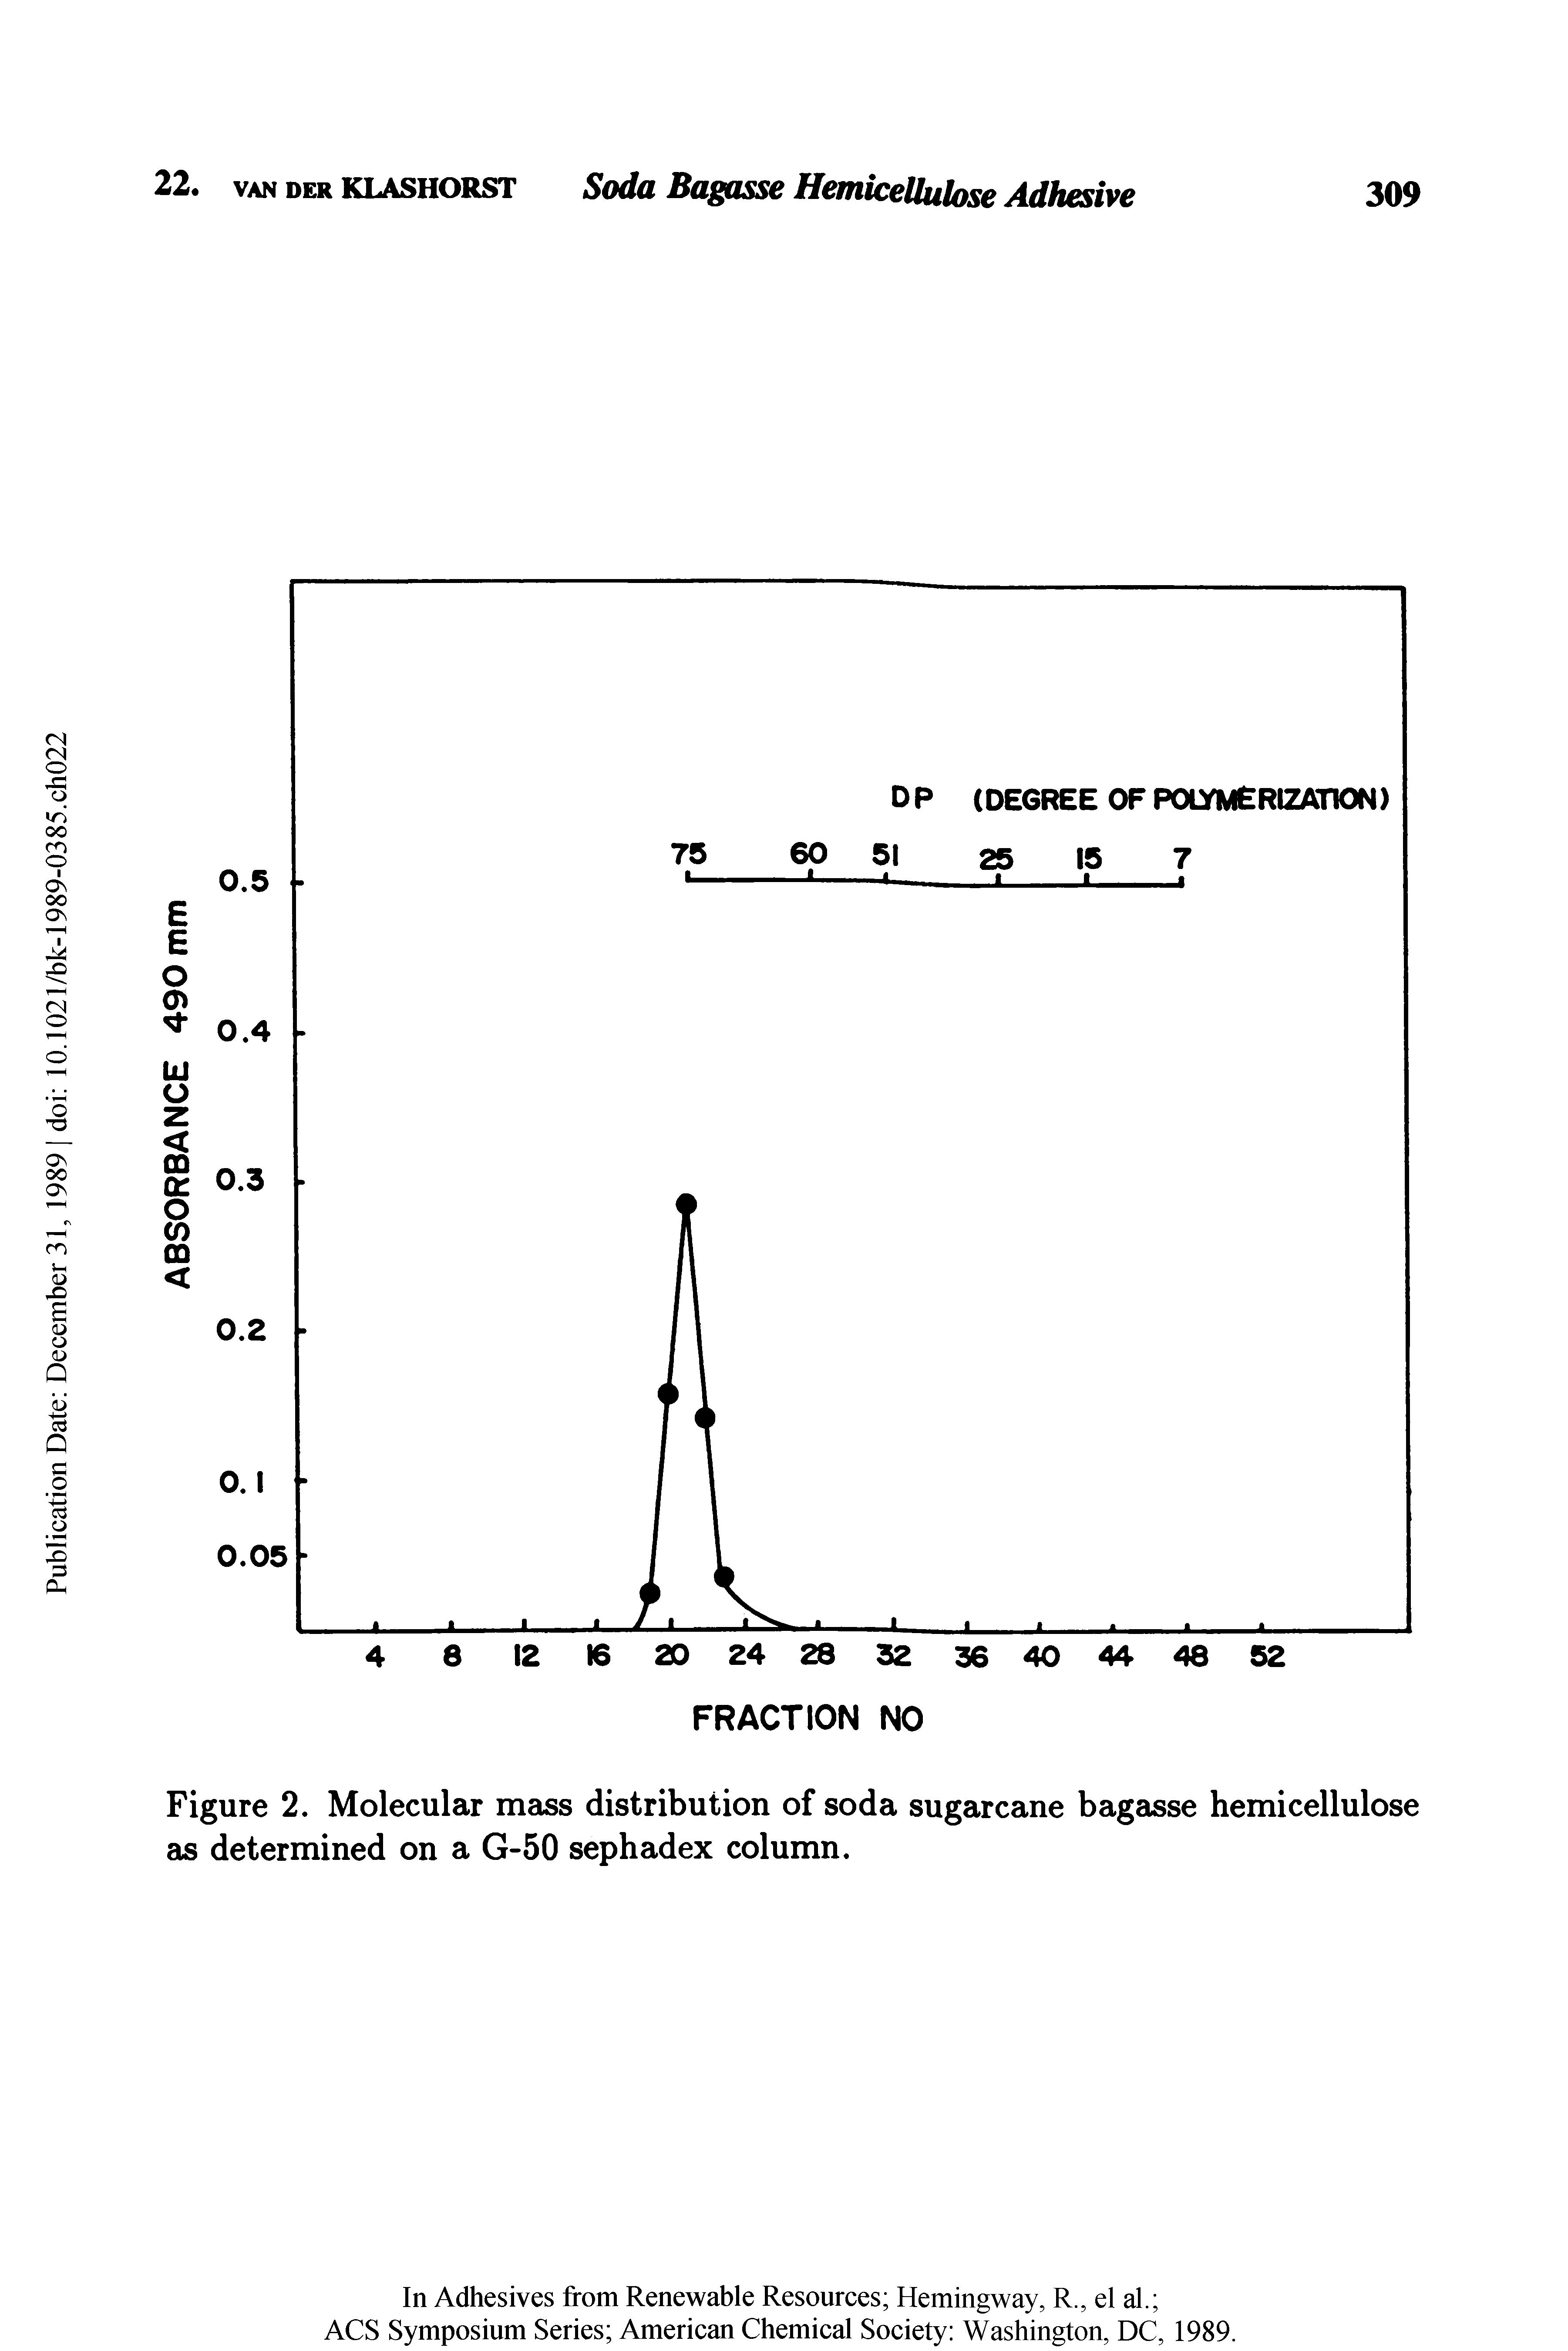 Figure 2. Molecular mass distribution of soda sugarcane bagasse hemicellulose as determined on a G-50 sephadex column.